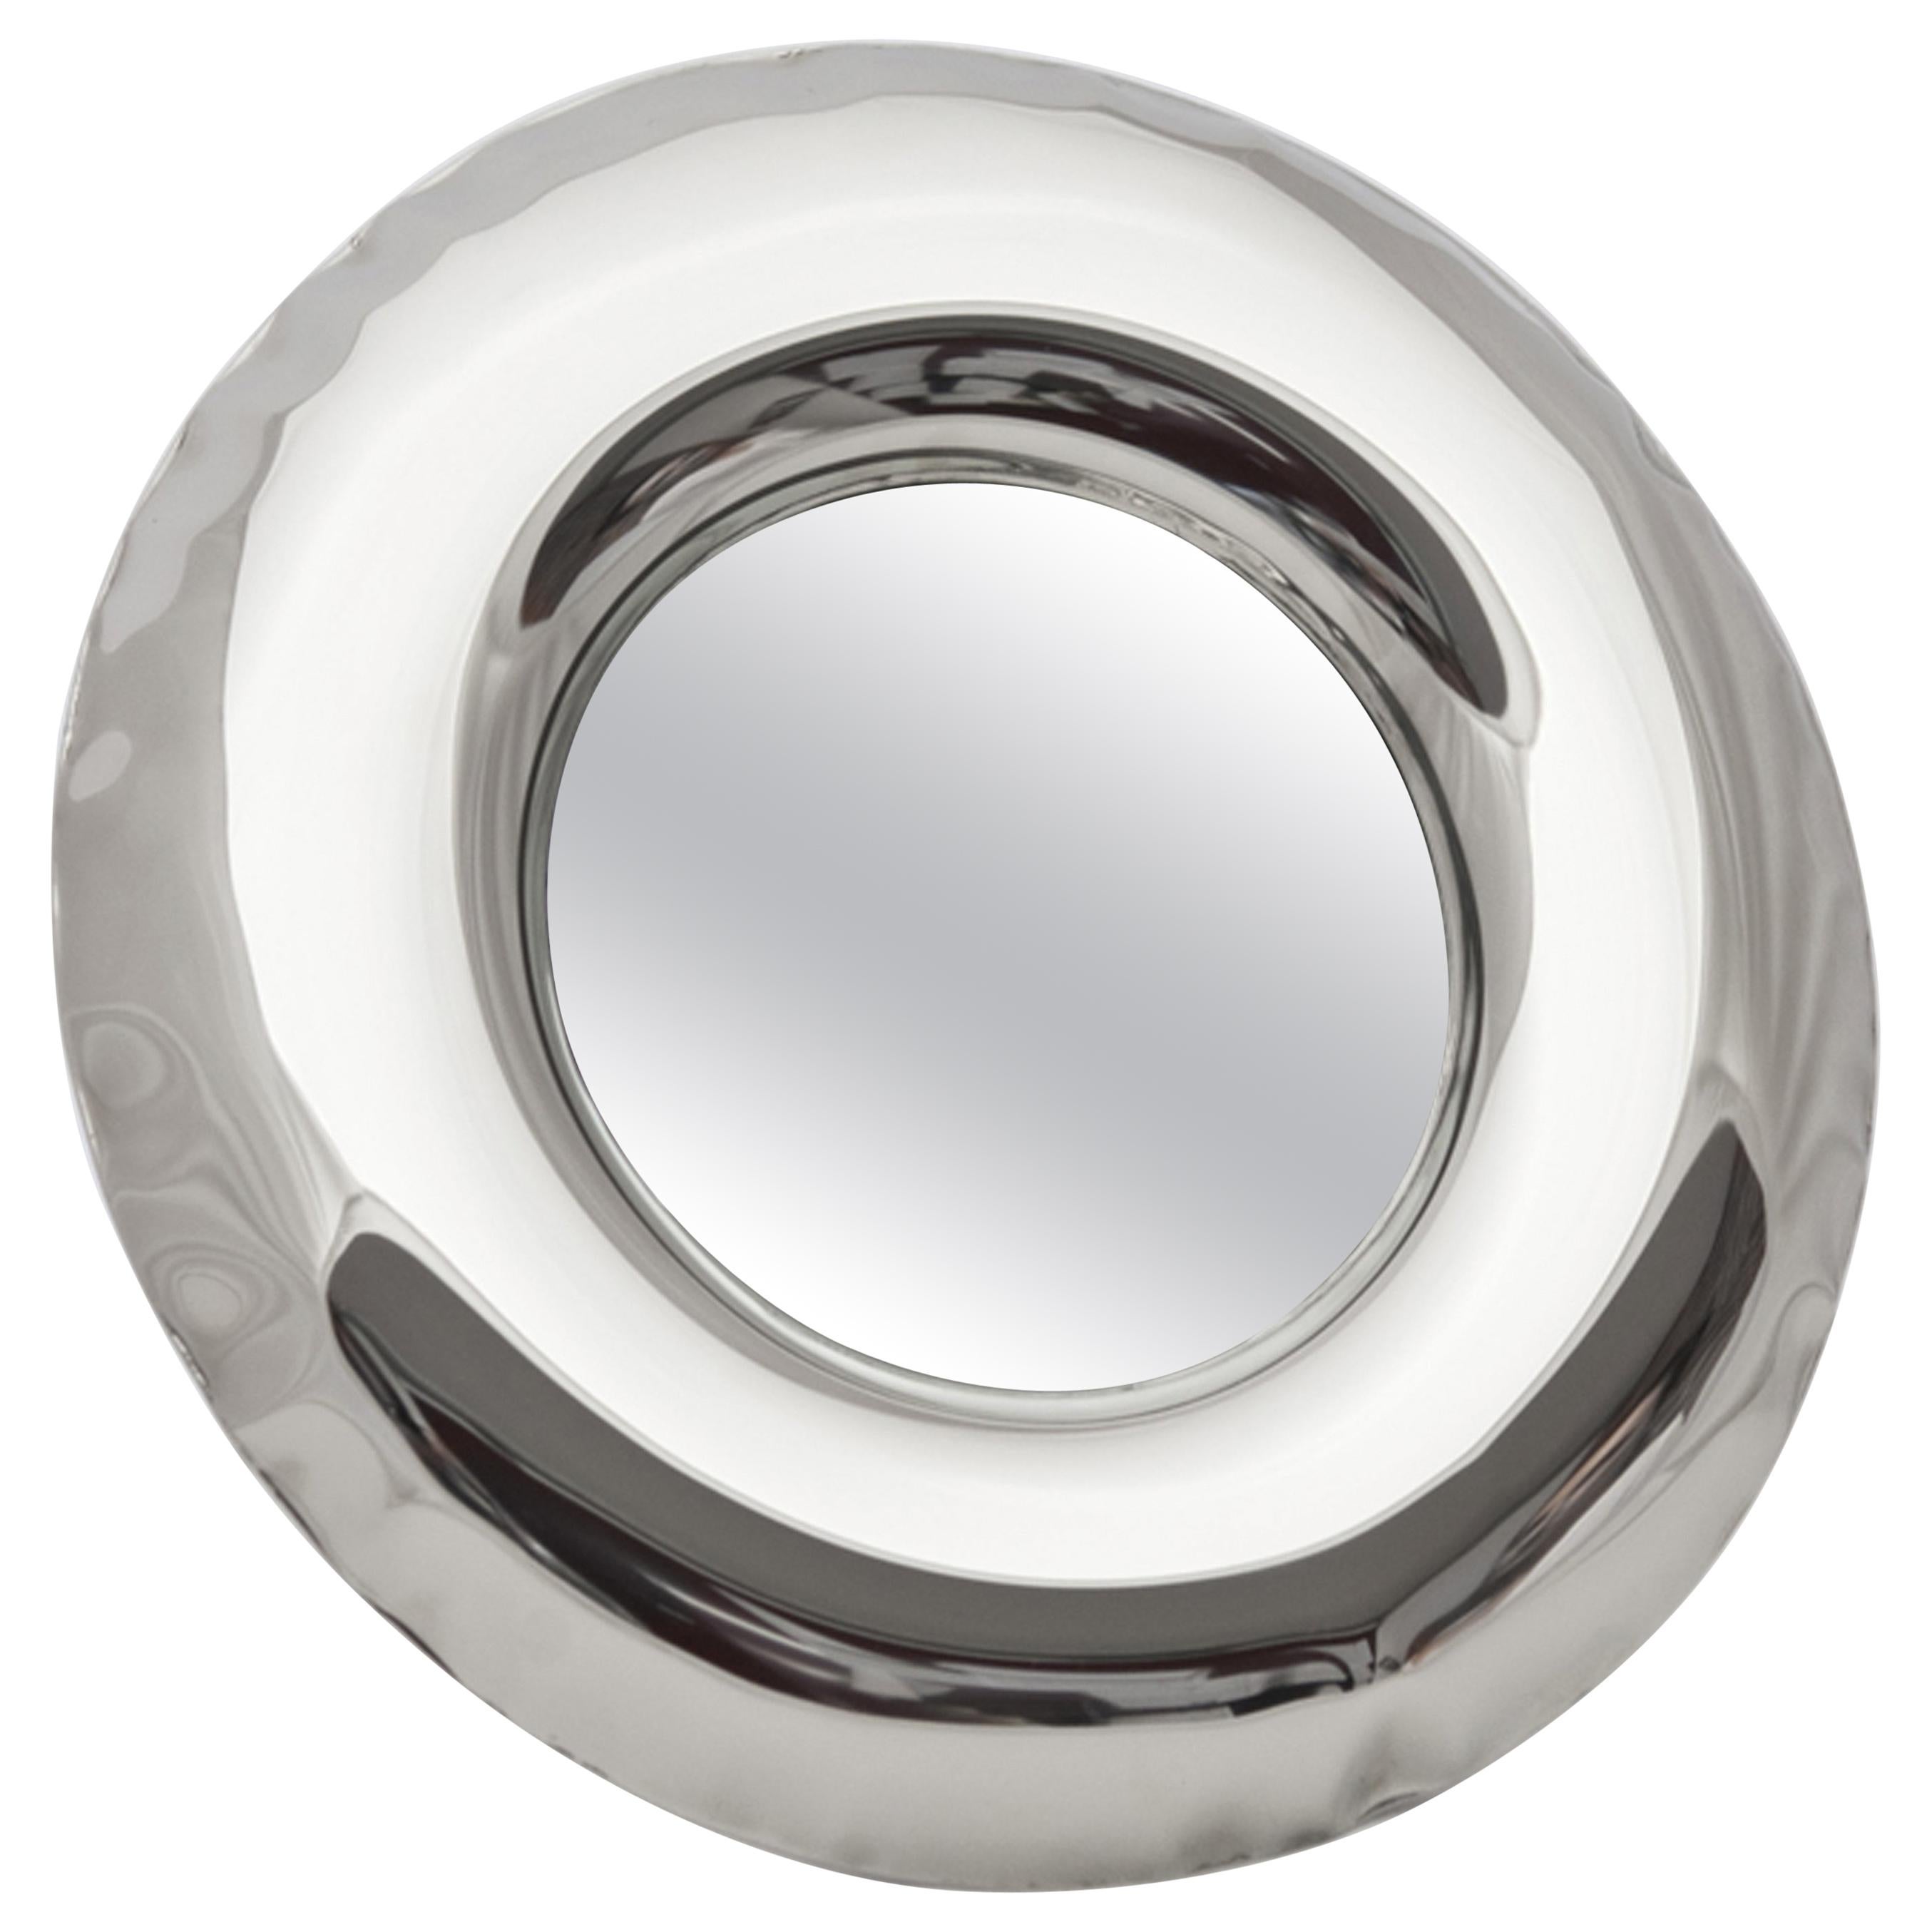 Rondel 36 Polished Stainless Steel Wall Mirror by Zieta For Sale